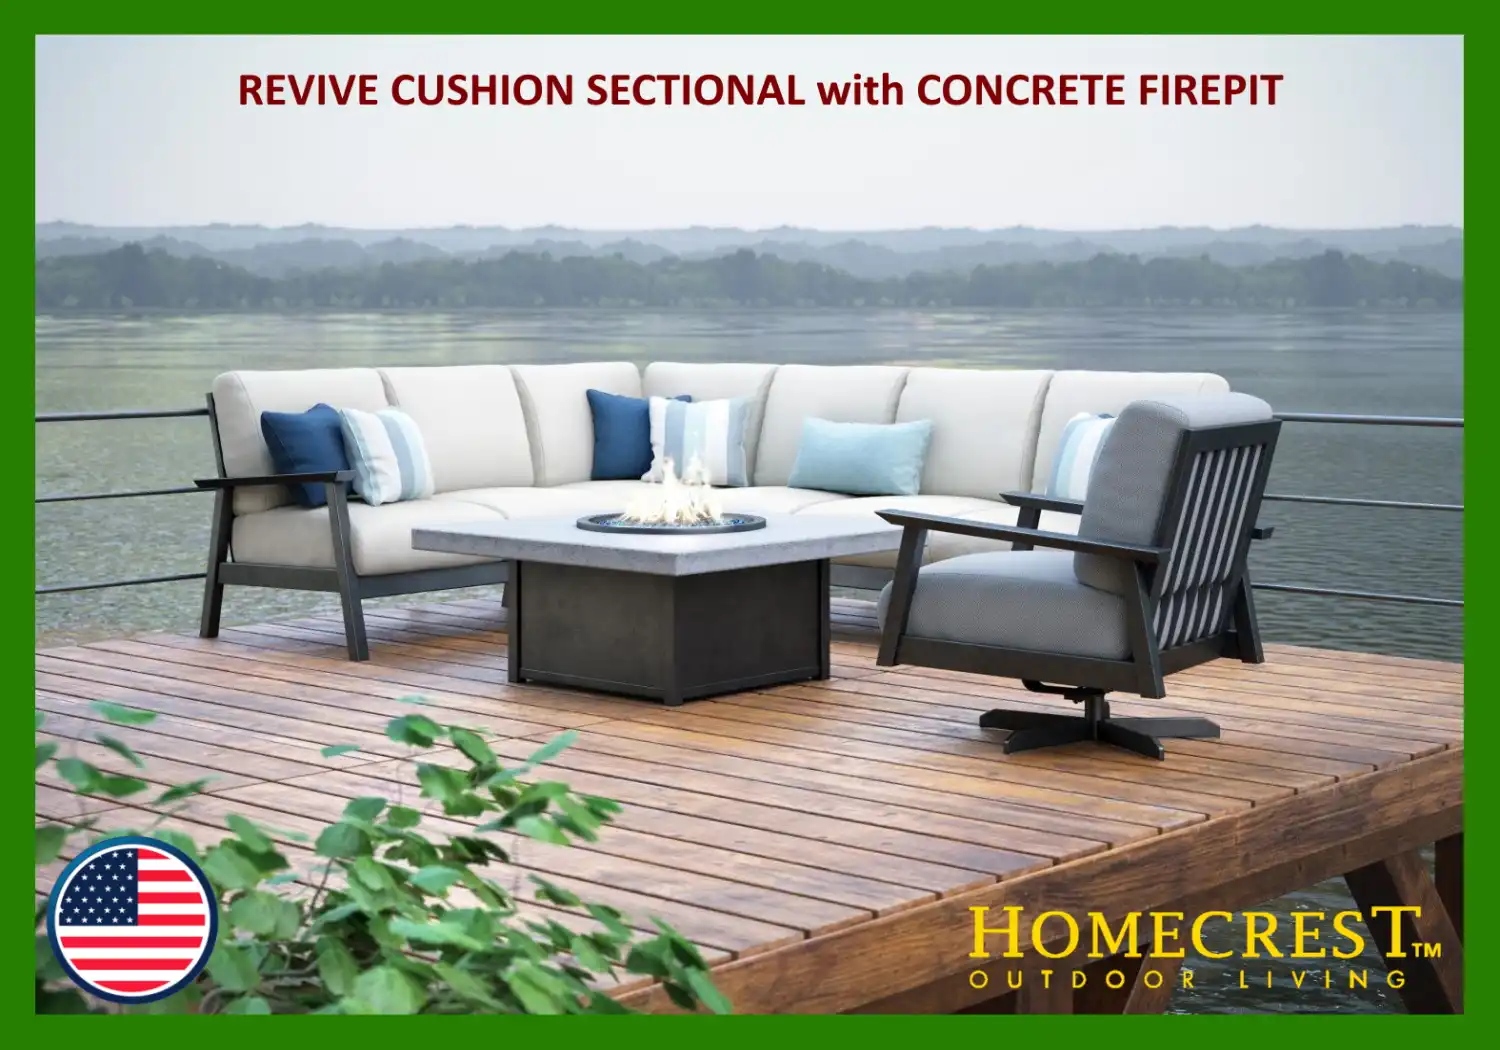 REVIVE CUSHION SECTIONAL with CONCRETE FIREPIT